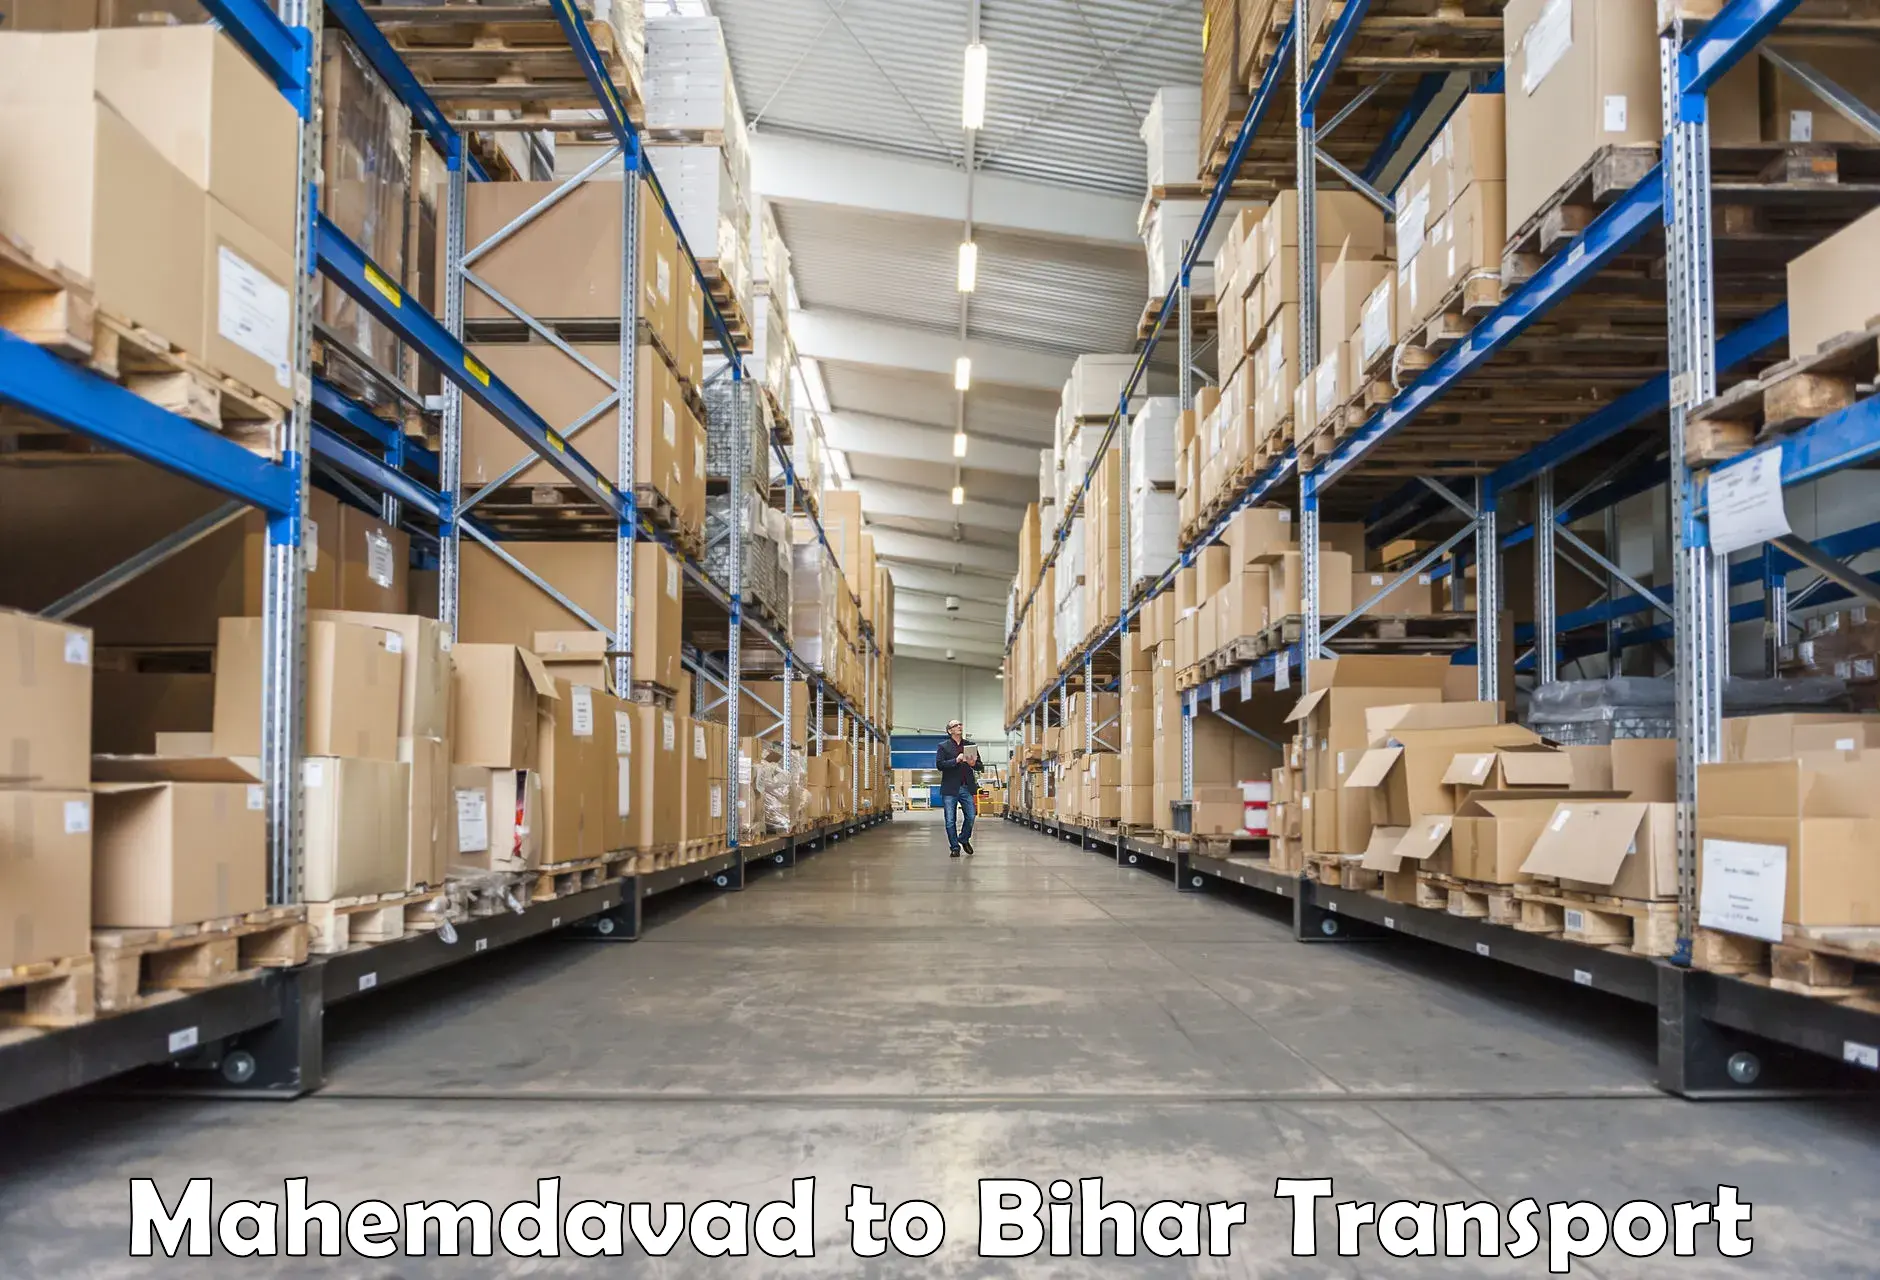 Container transport service Mahemdavad to Sheohar